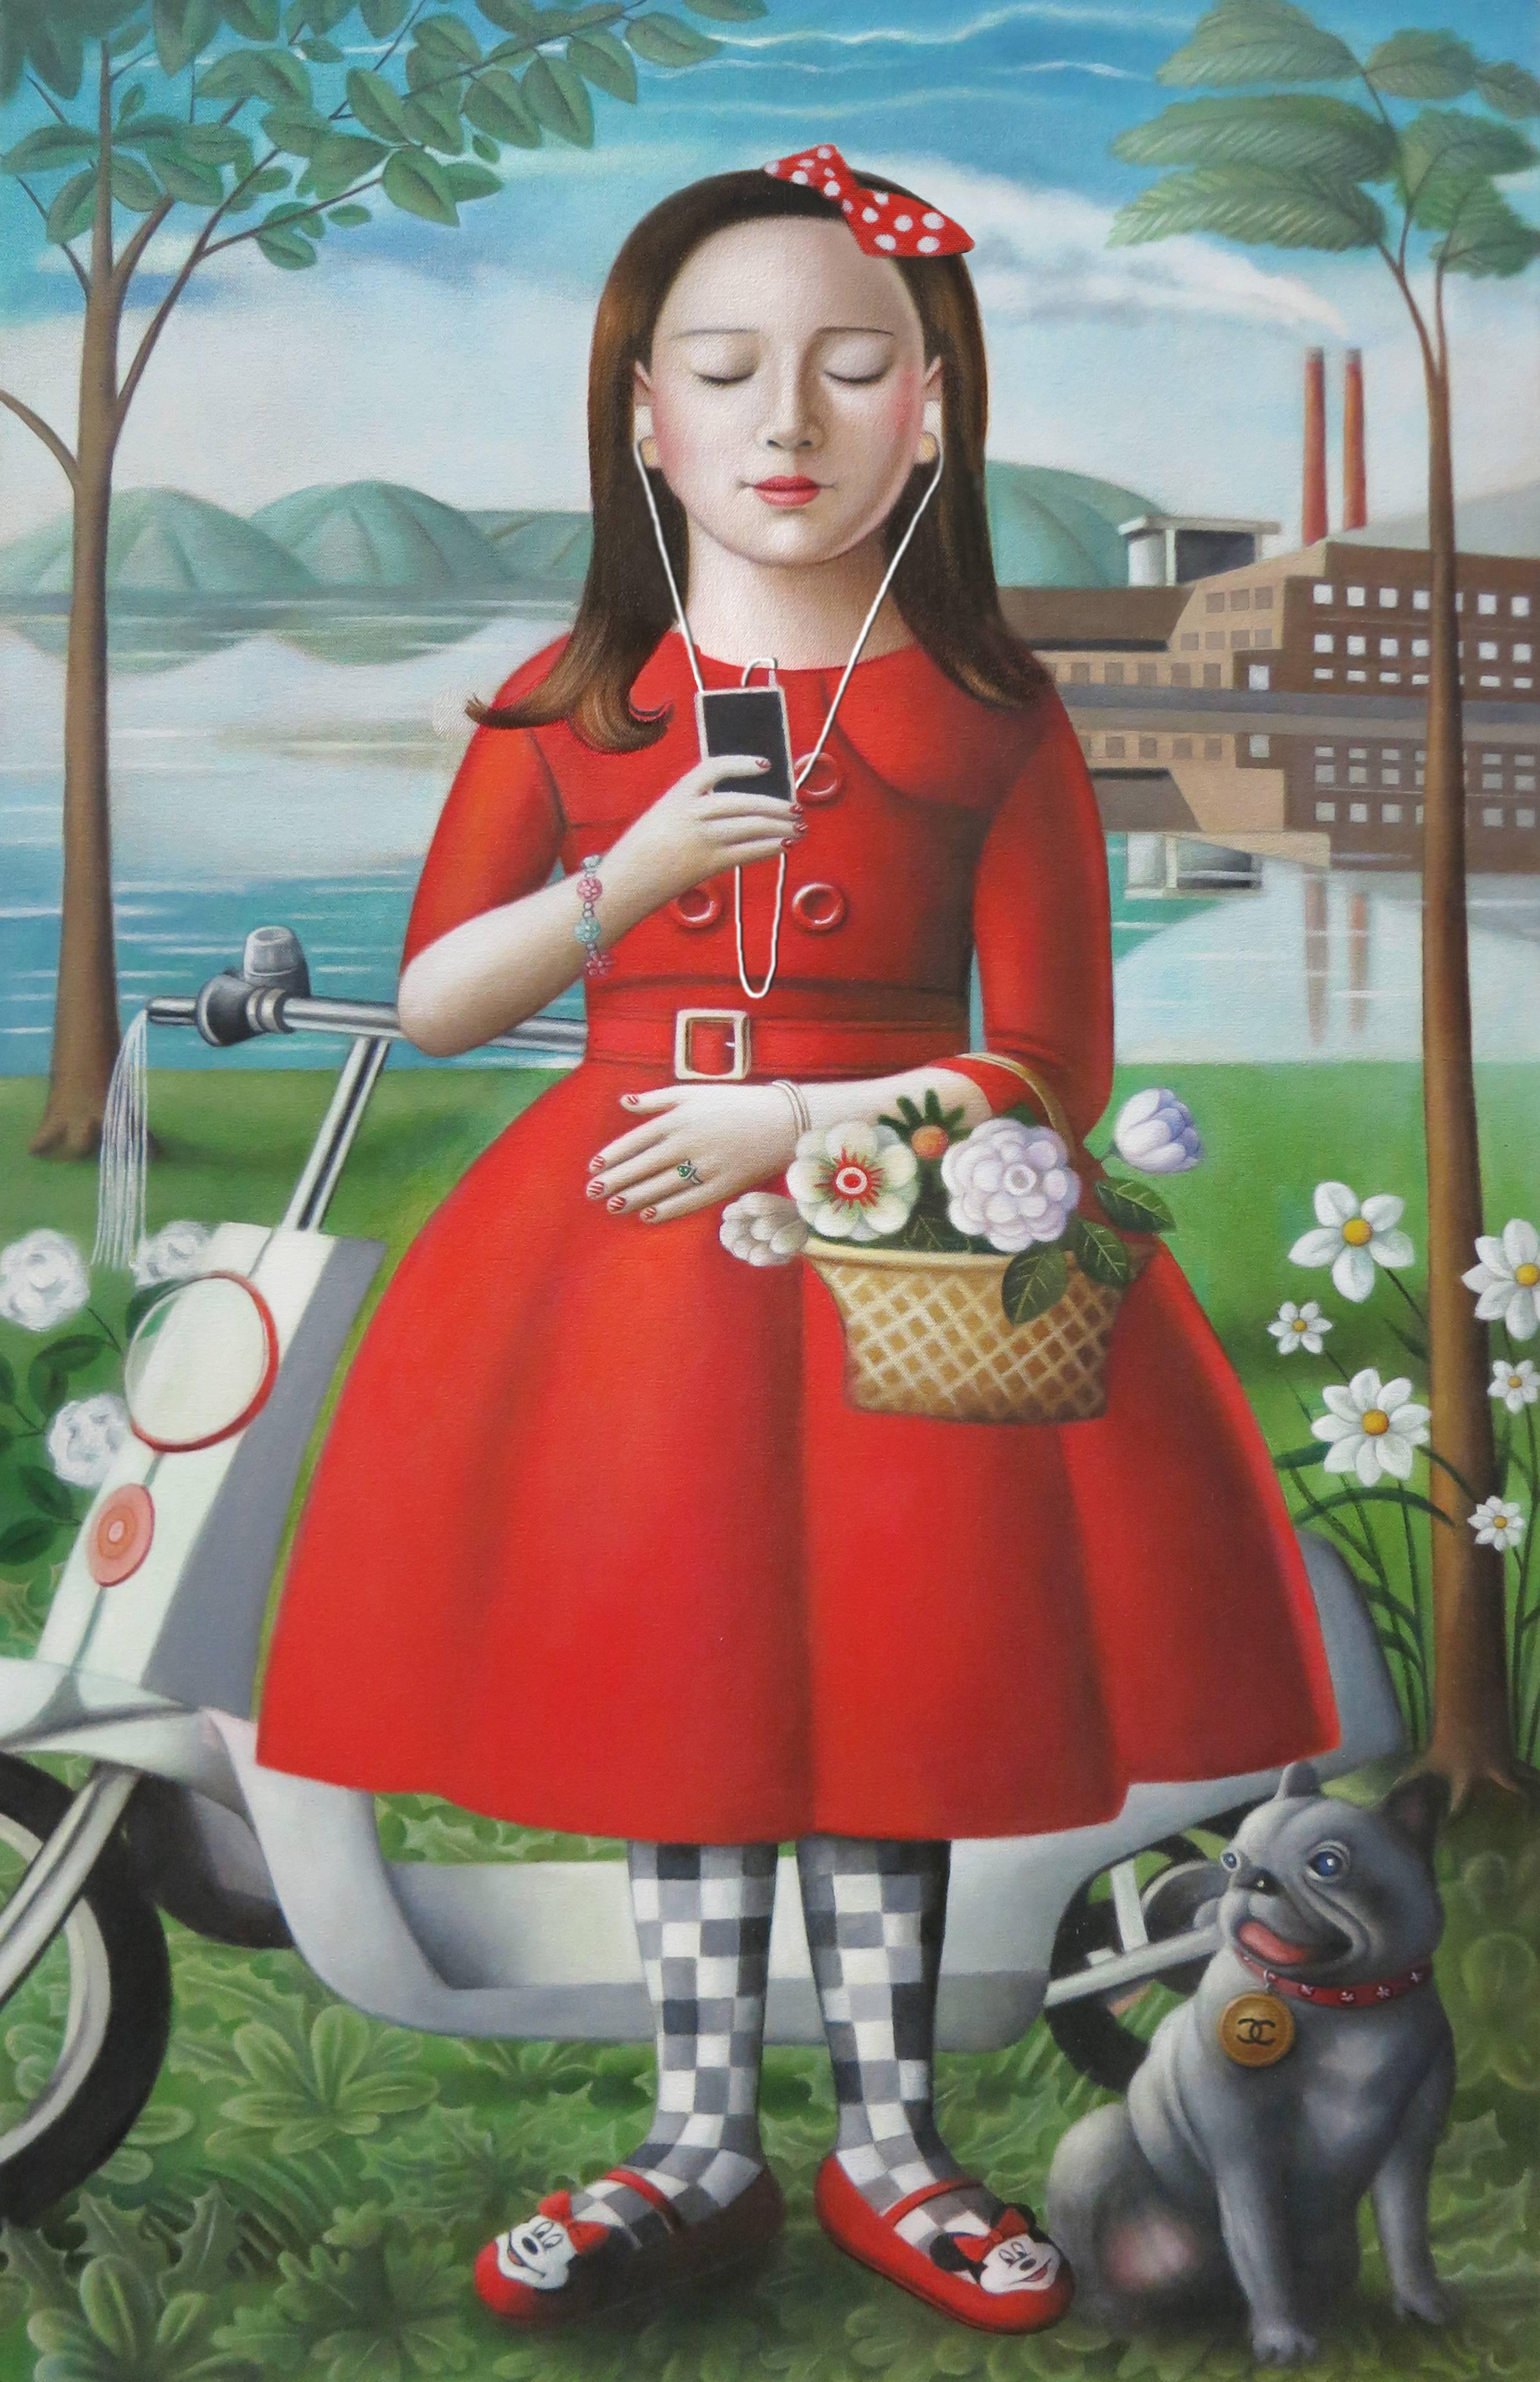 Amy Hill Landscape Painting - Girl With Skooter